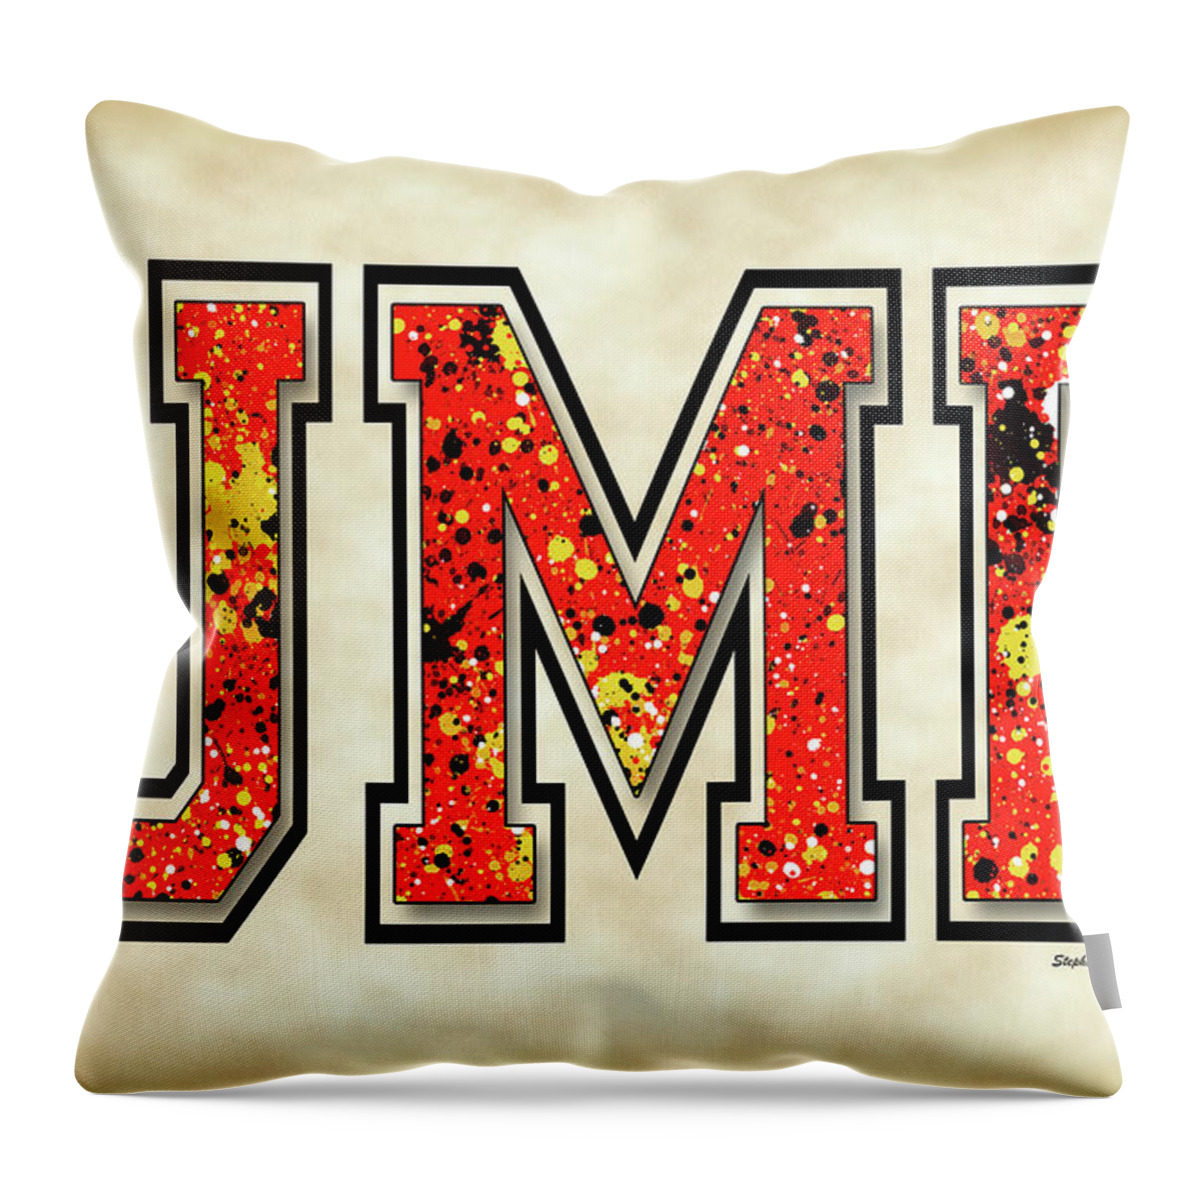 Umd Throw Pillow featuring the digital art UMD - University of Maryland - Parchment by Stephen Younts